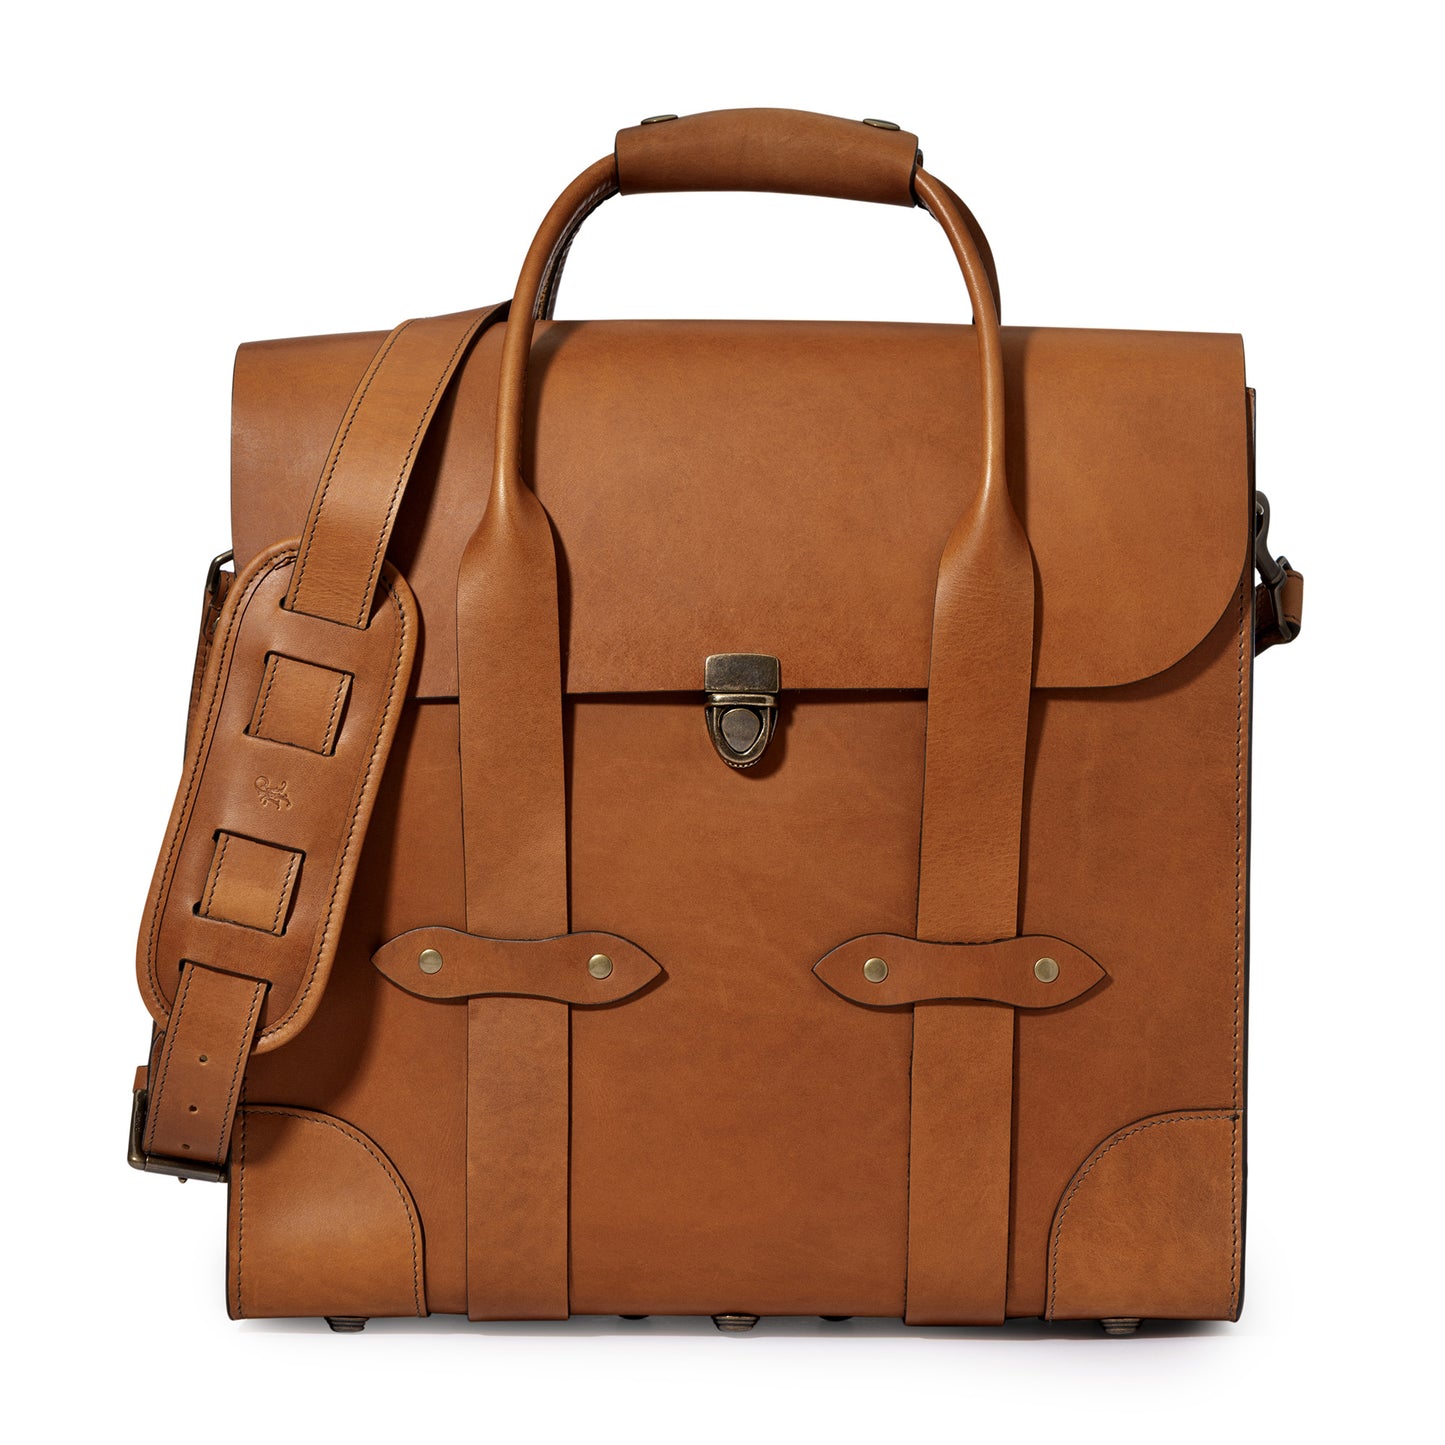 bourbon bag whiskey & wine tote in full grain leather - saddle tan color with shoulder strap